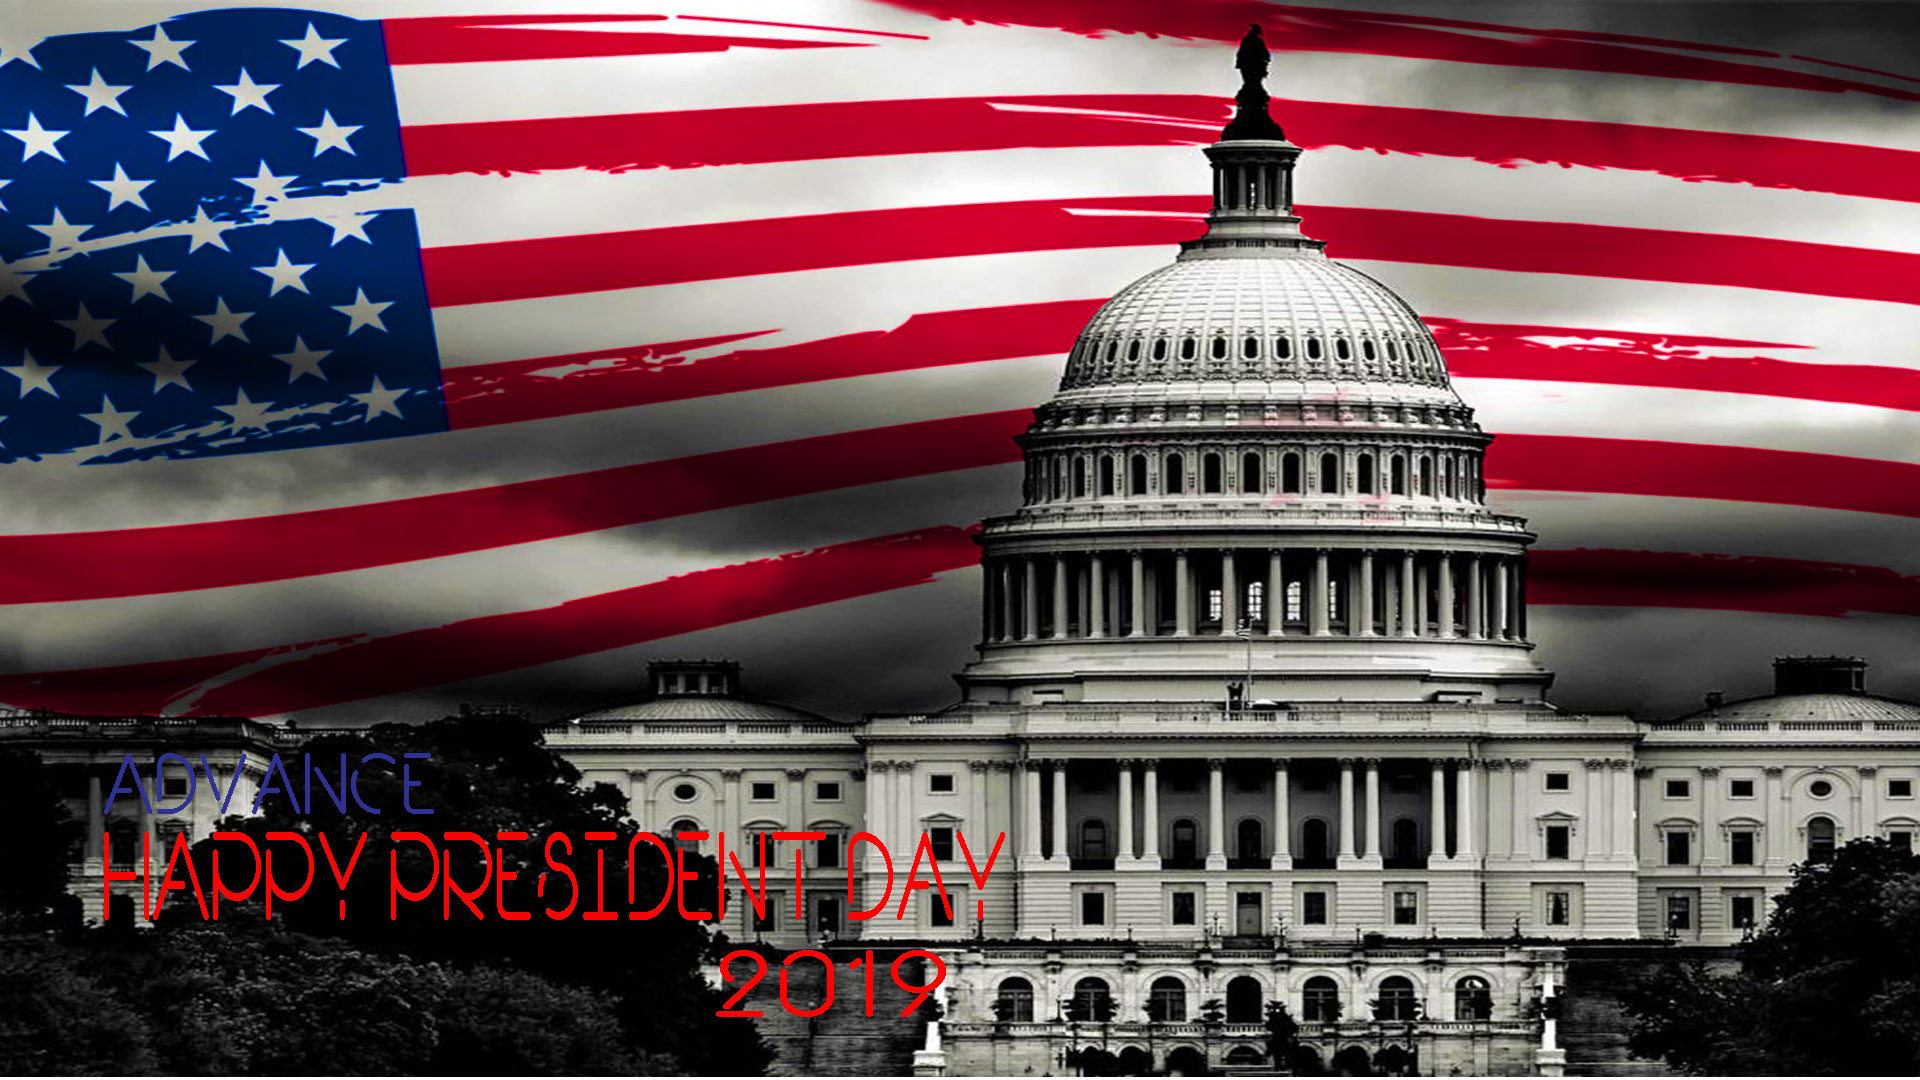 Advance Happy President Day Wishes Image Usa